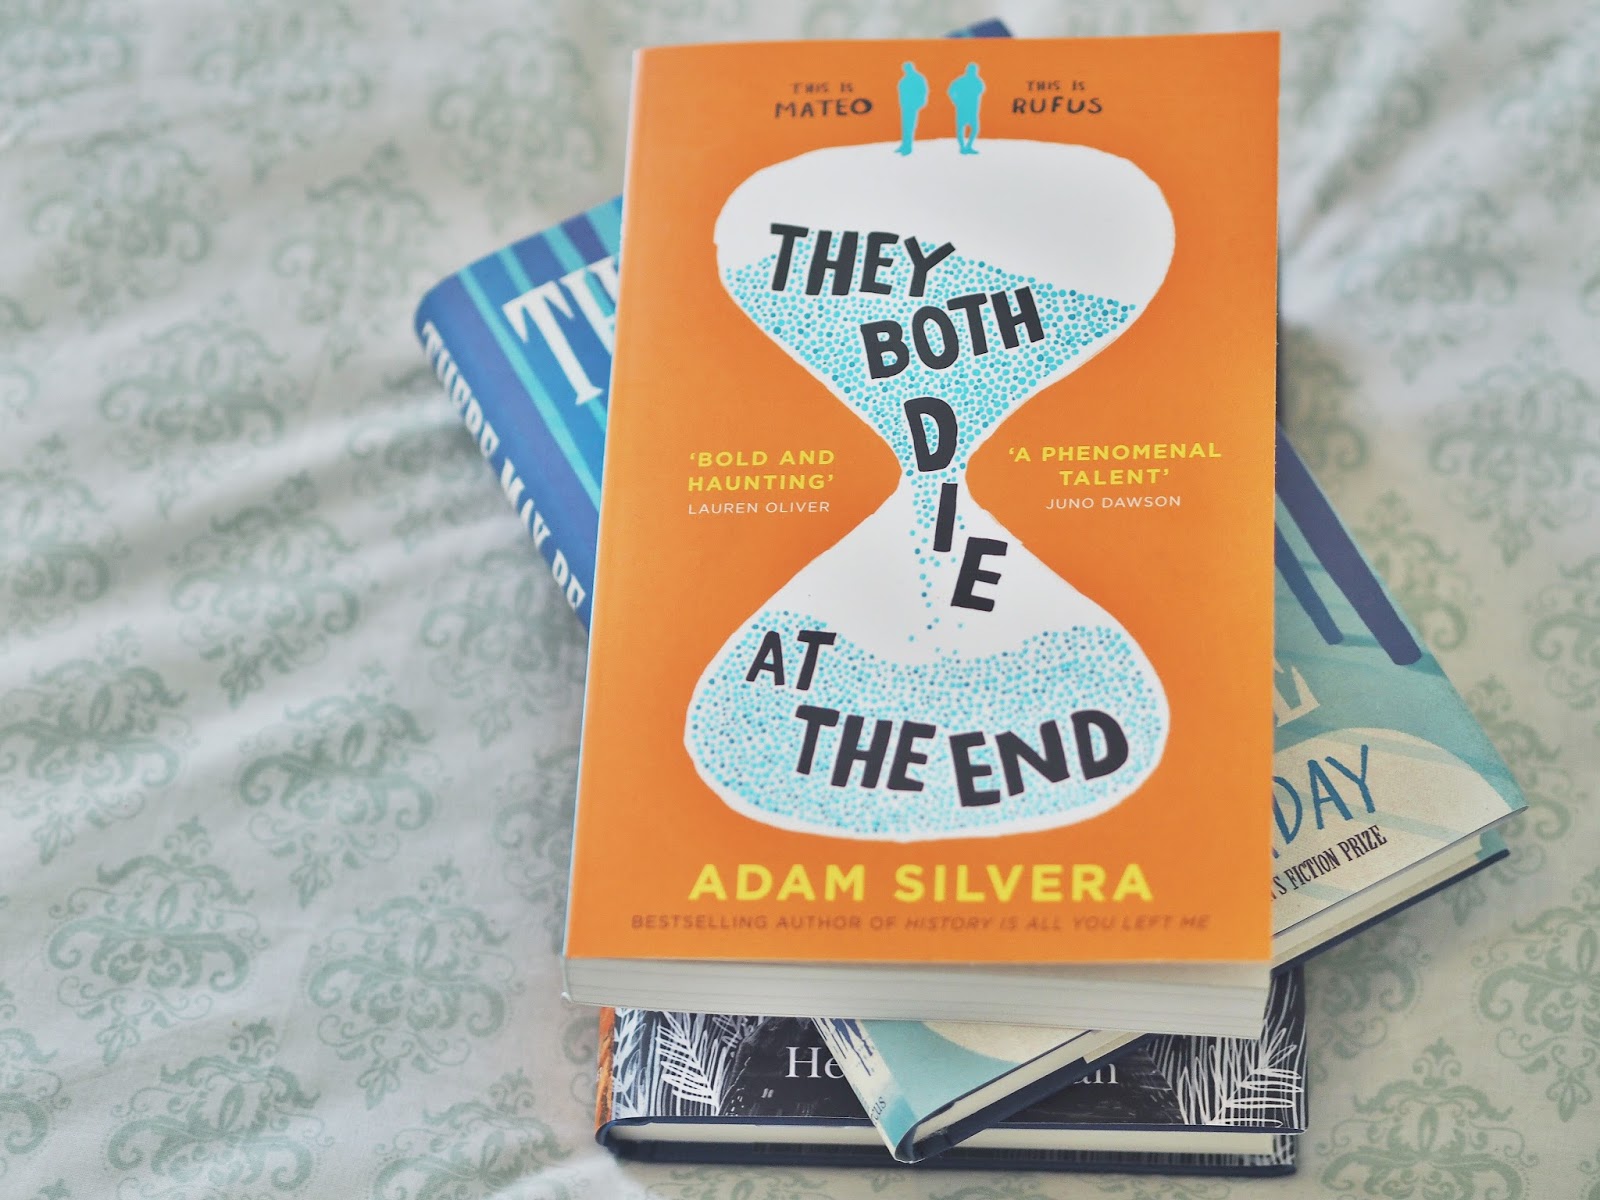 They both die at the end книга. «They both die at the end» by Adam Silvera. Книга they both die at the. Сильвера в конце они оба умрут